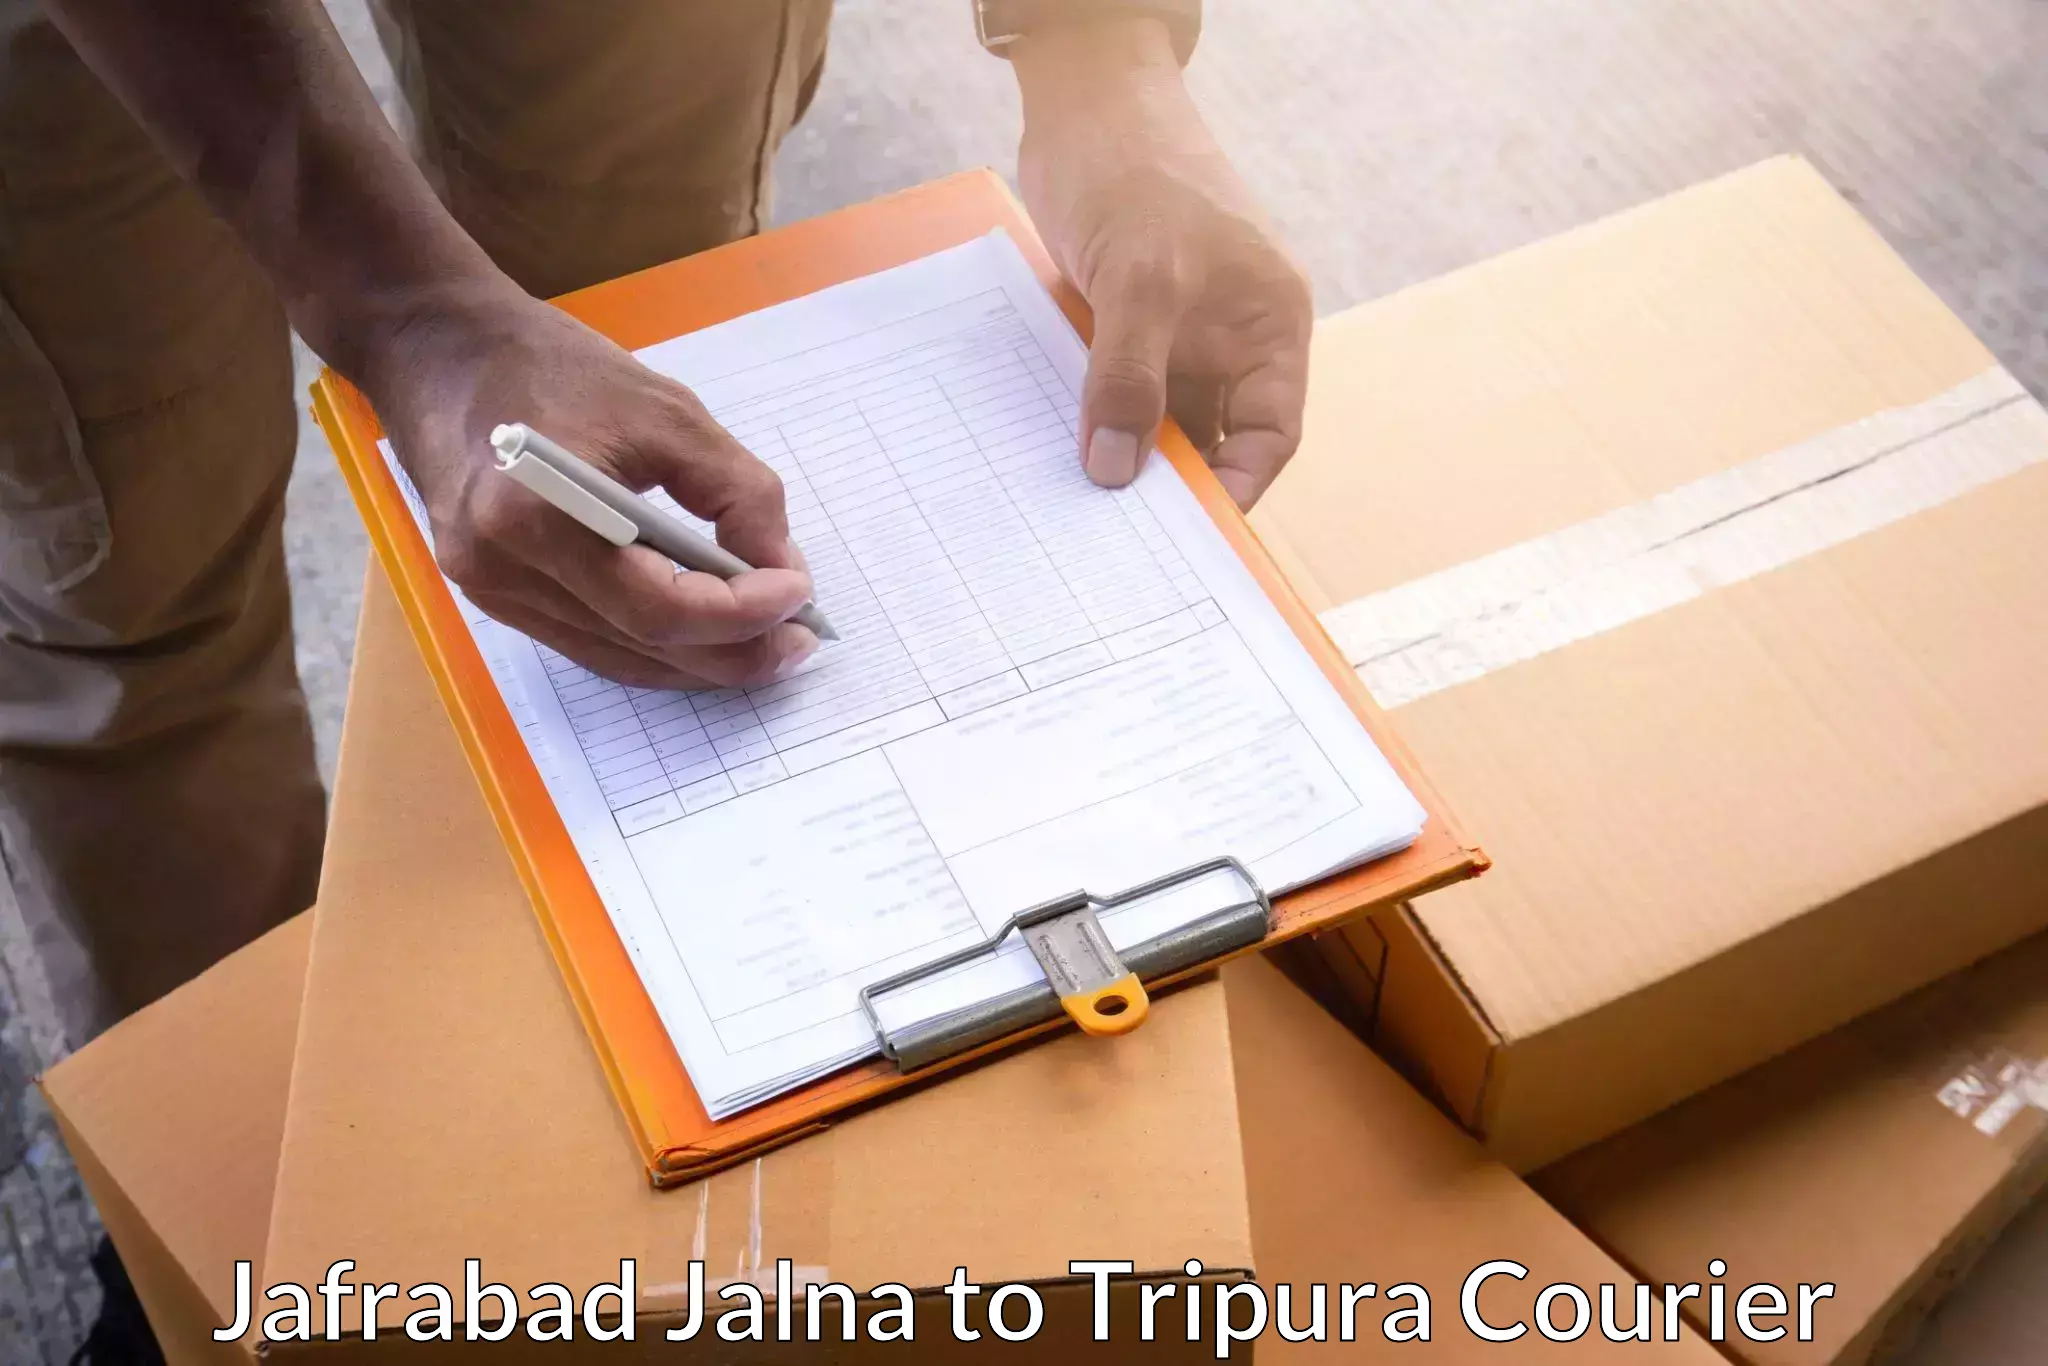 Professional courier services Jafrabad Jalna to Udaipur Tripura